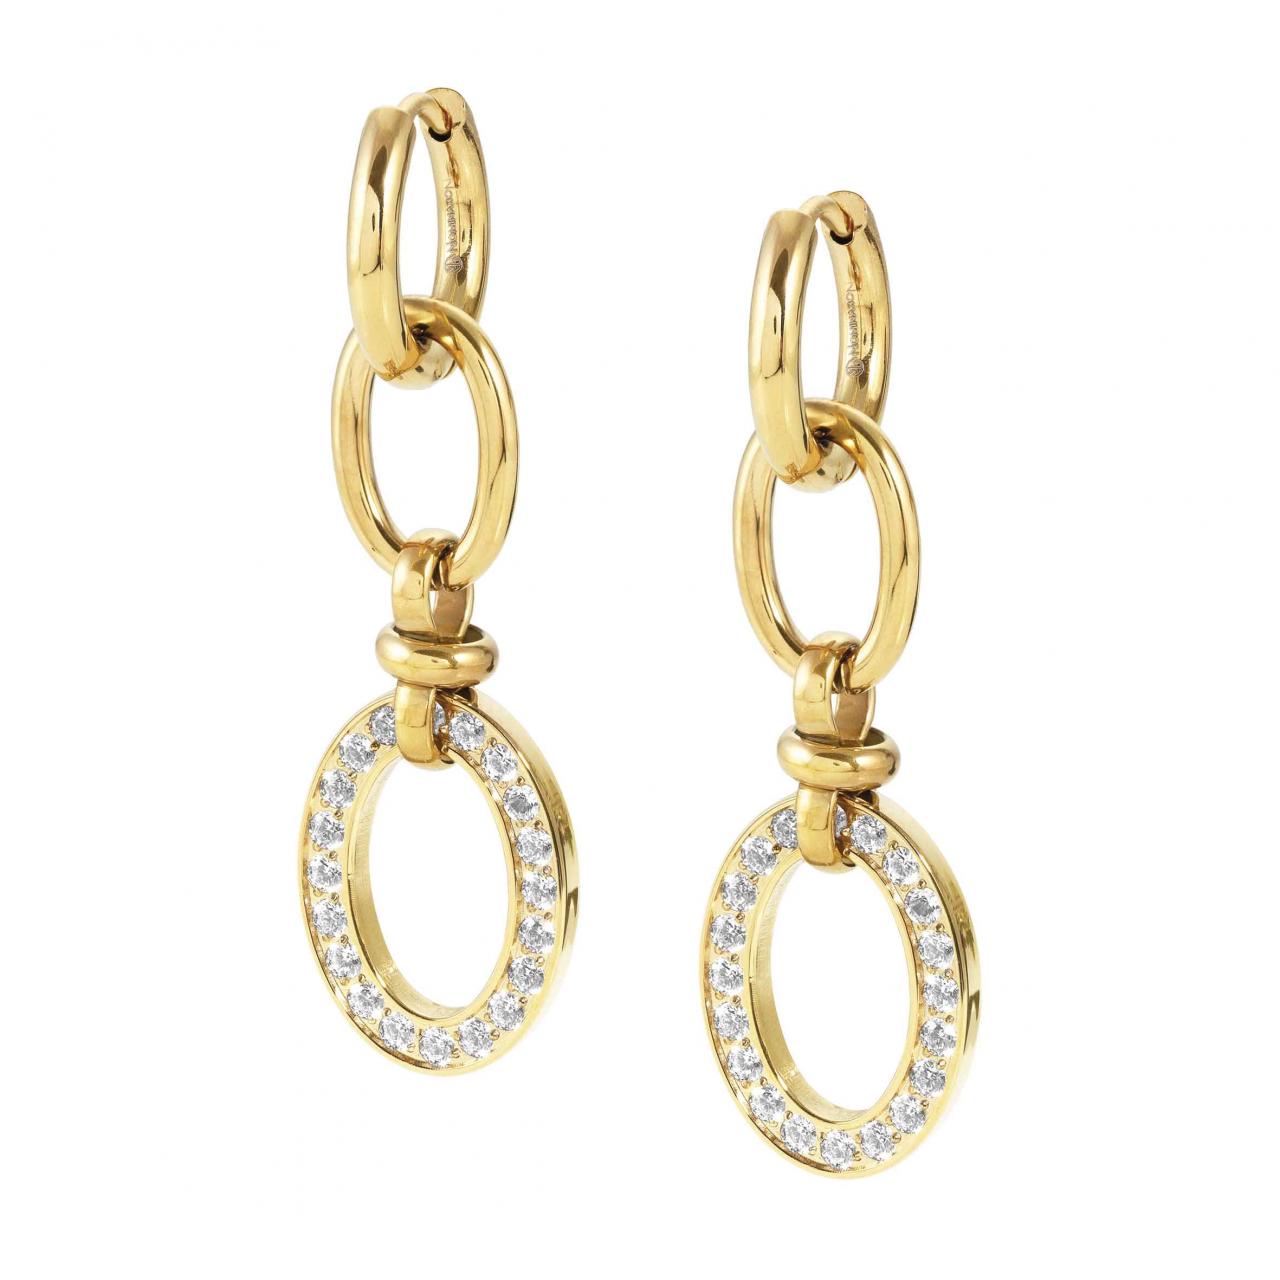 Affinity gold PVD coated stainless steel chain drop earrings